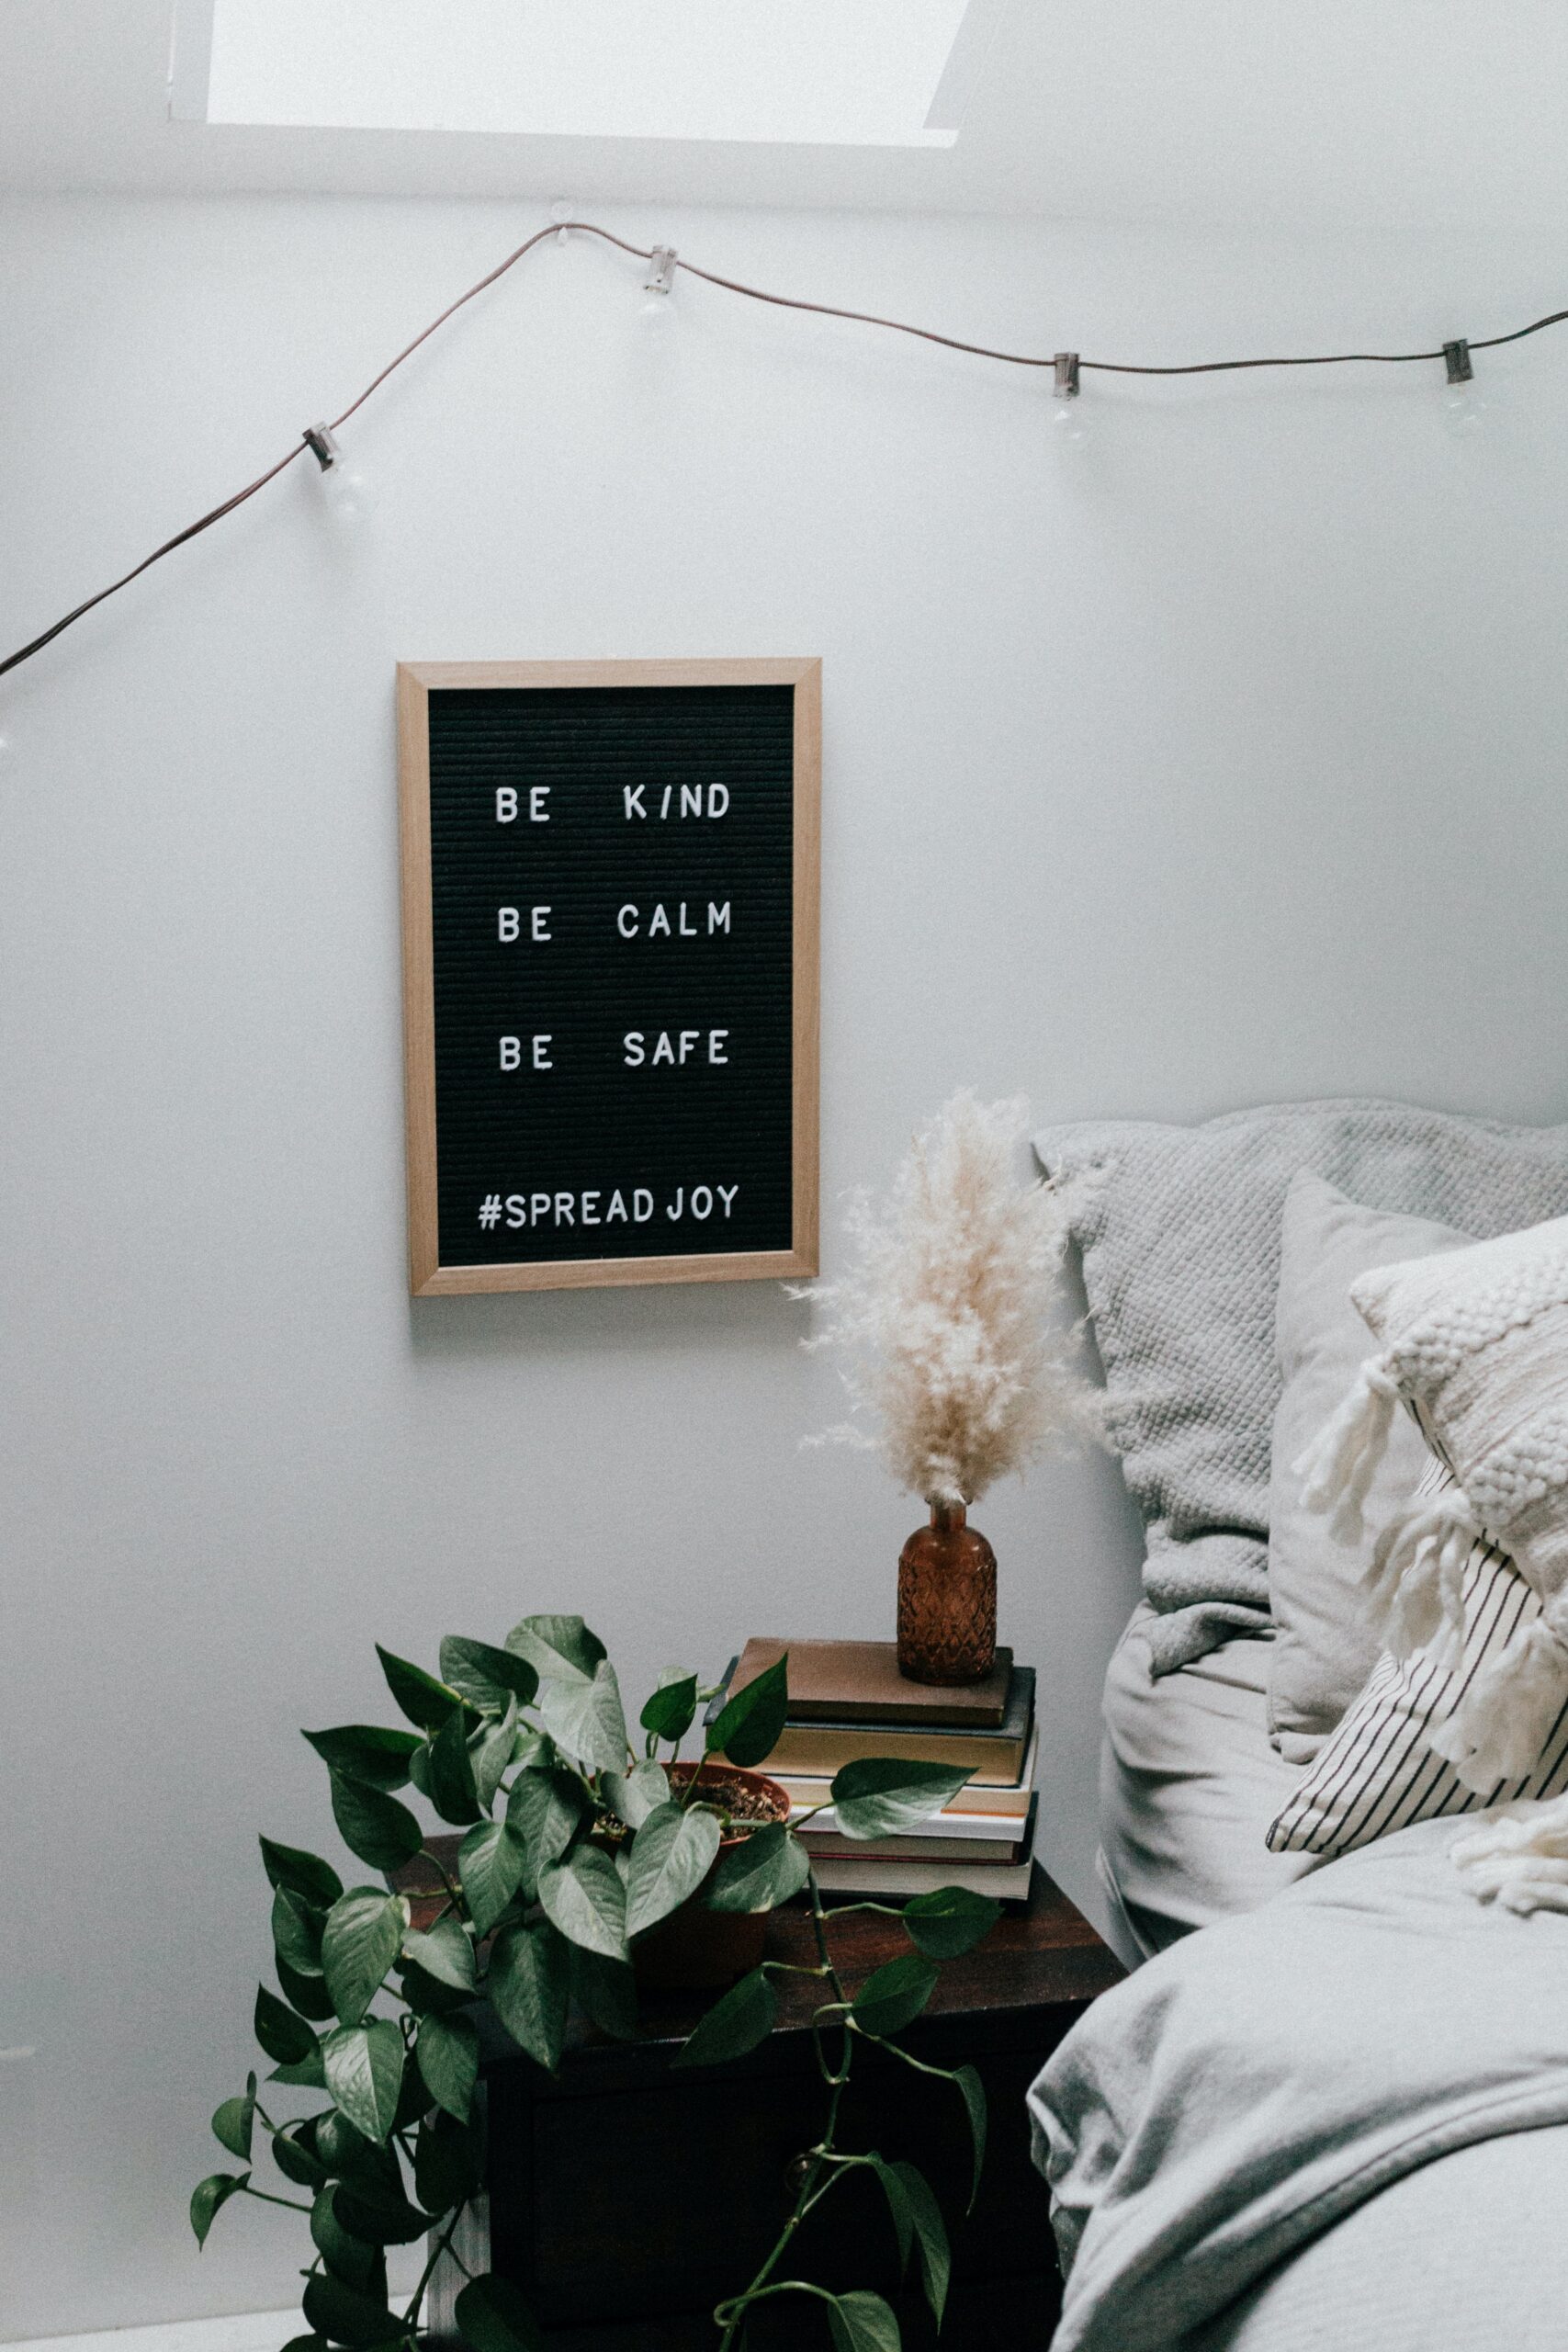 Discover the benefits of a minimalist lifestyle! Learn how to declutter, simplify, and practice conscious consumerism for a more fulfilling and meaningful life. Start your journey now - photo by Priscilla du preez from Unsplash